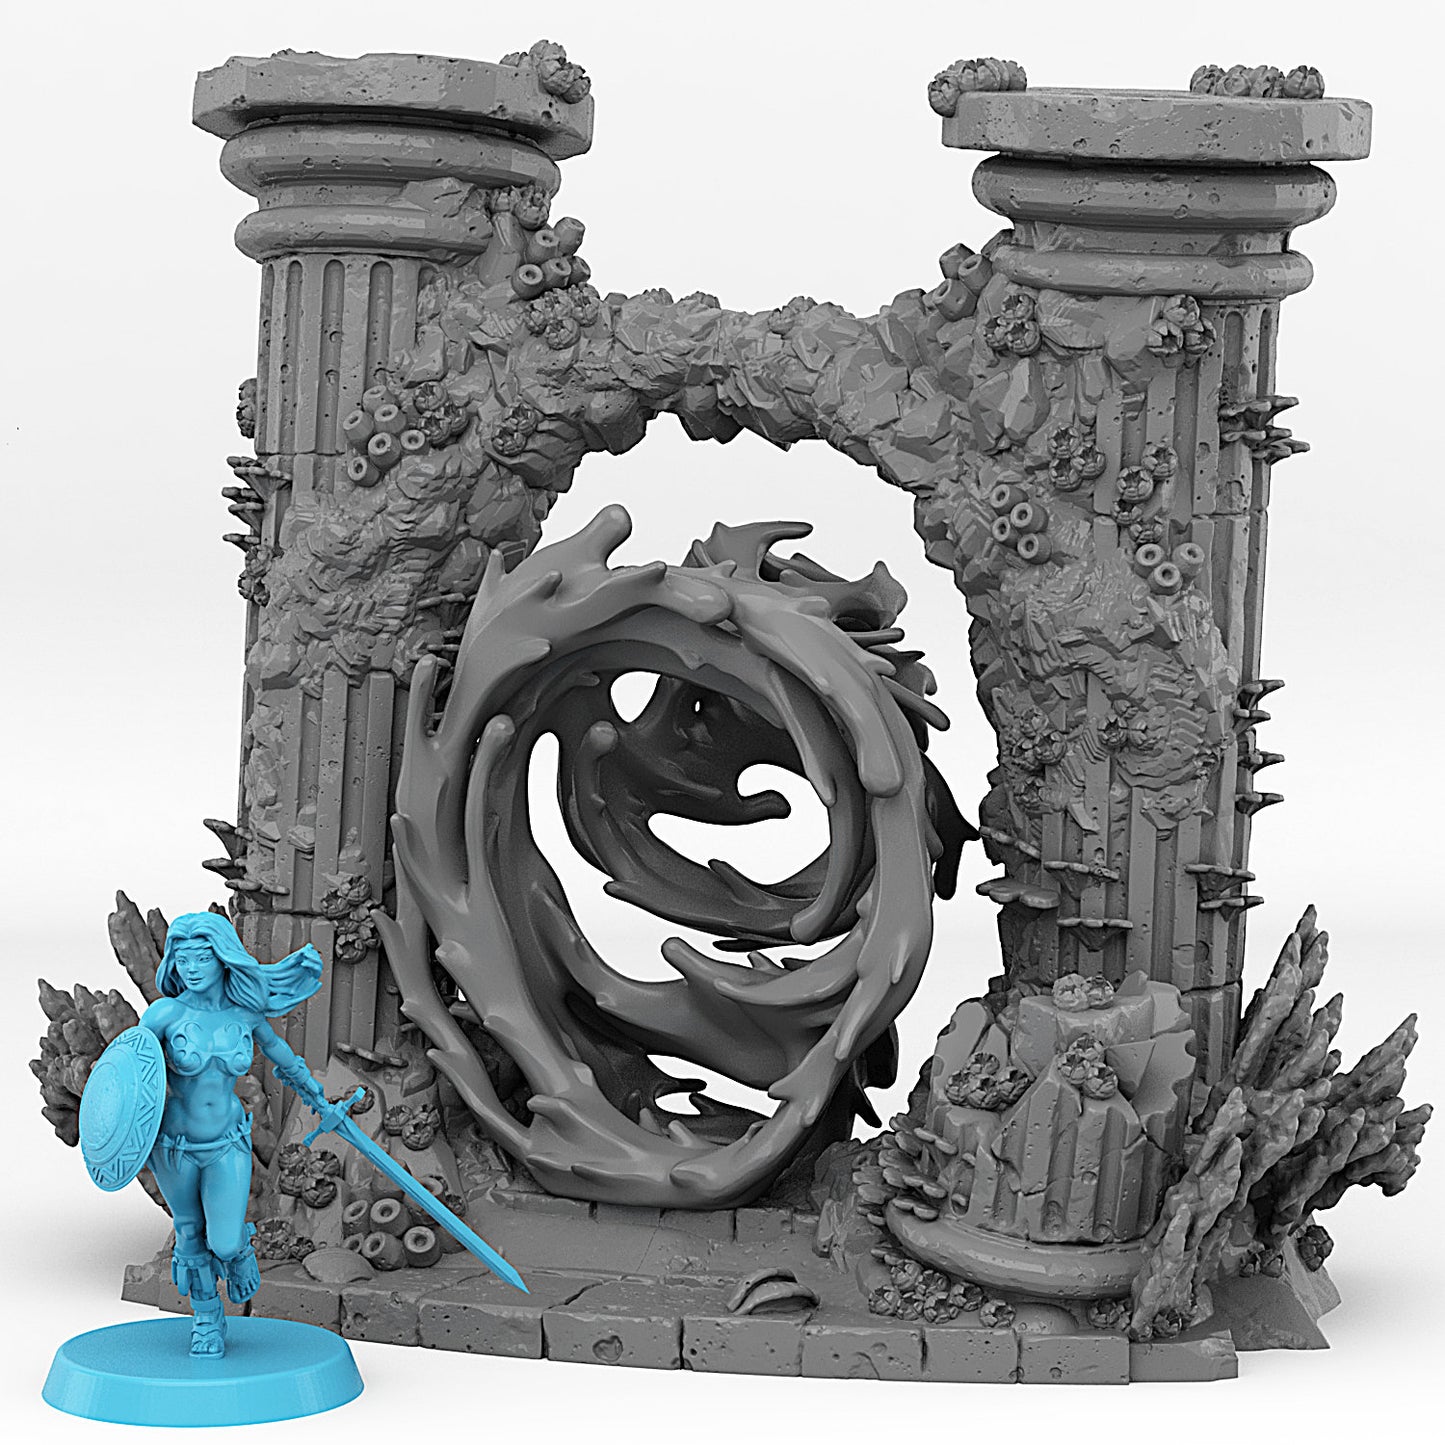 Underwater Temple Portal | Scenery and terrain | 3D Printed Resin Miniature | Tabletop Role Playing | AoS | D&D | 40K | Pathfinder